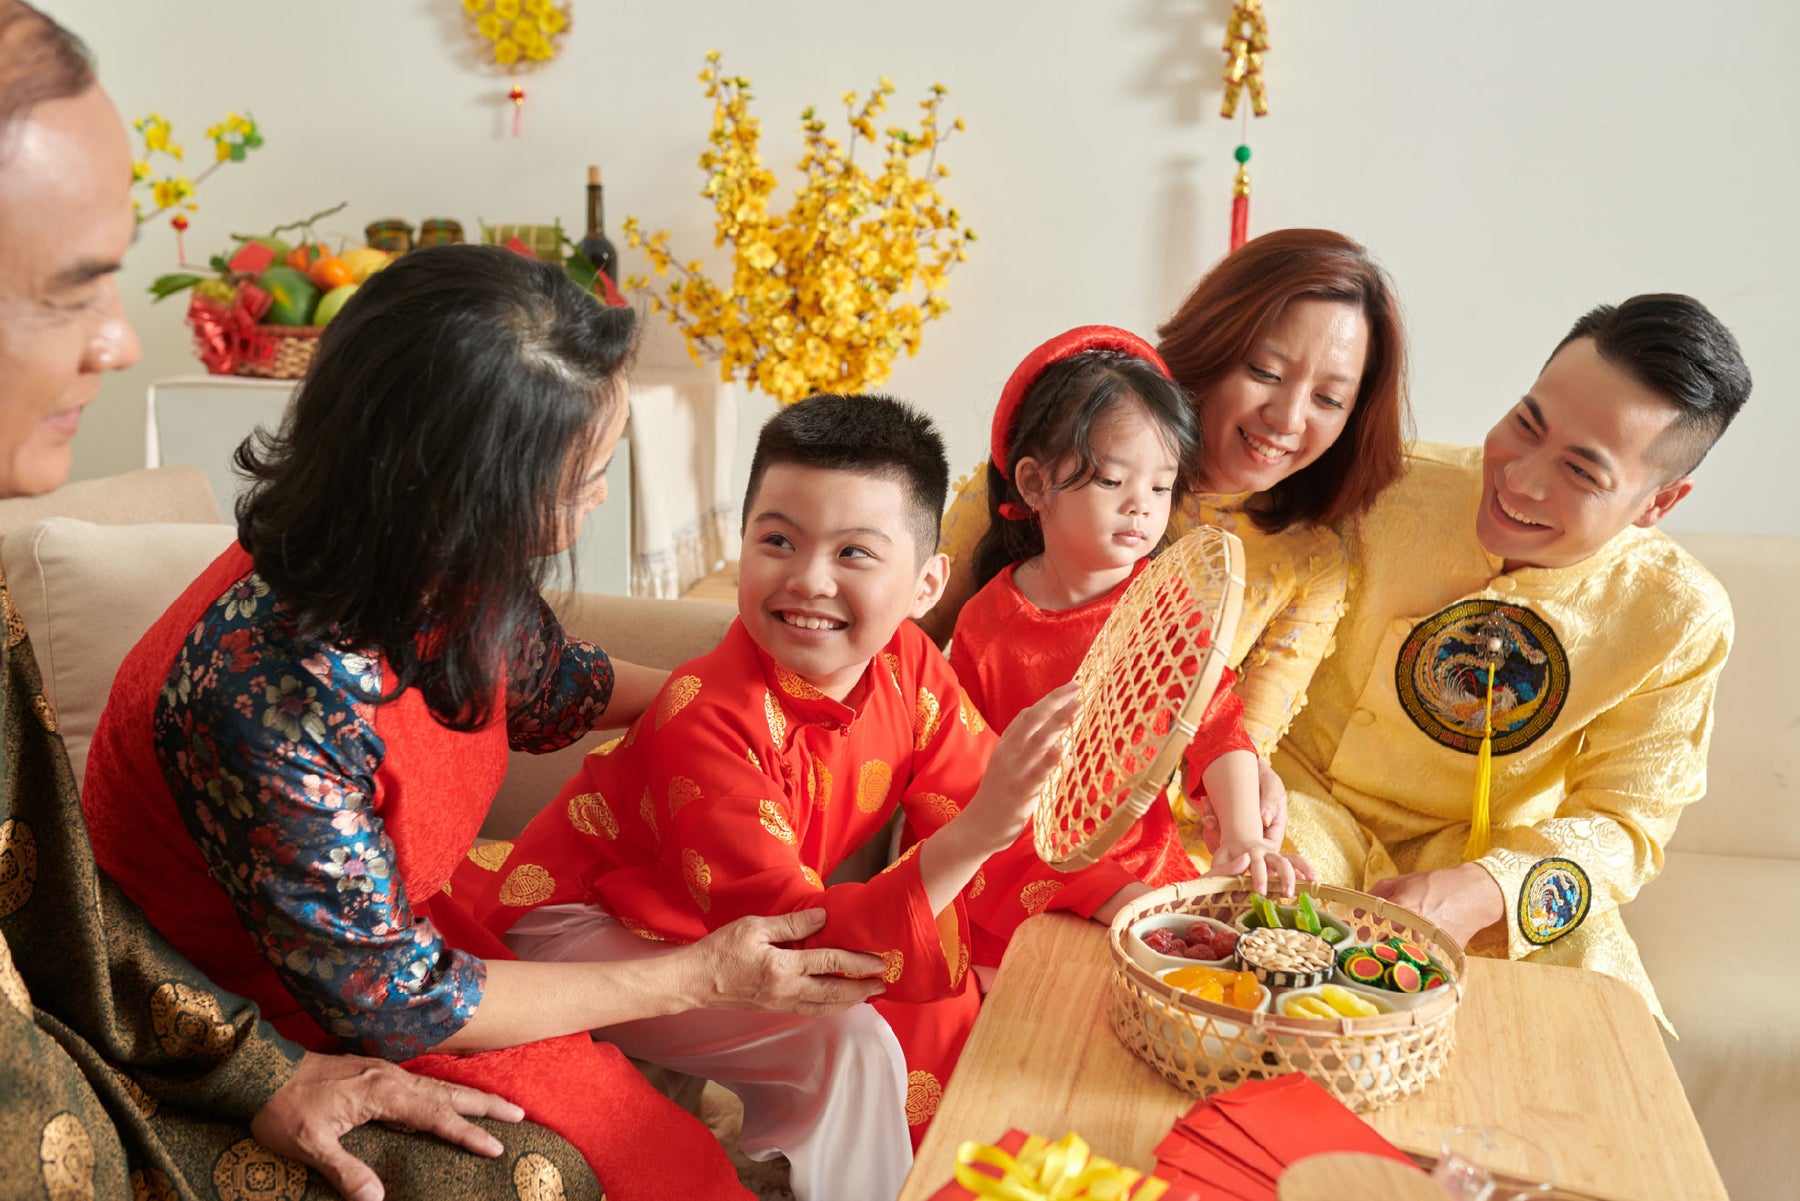 Celebrating Chinese New Year in Singapore: A Guide to Traditional Snacks and Healthy Snacking